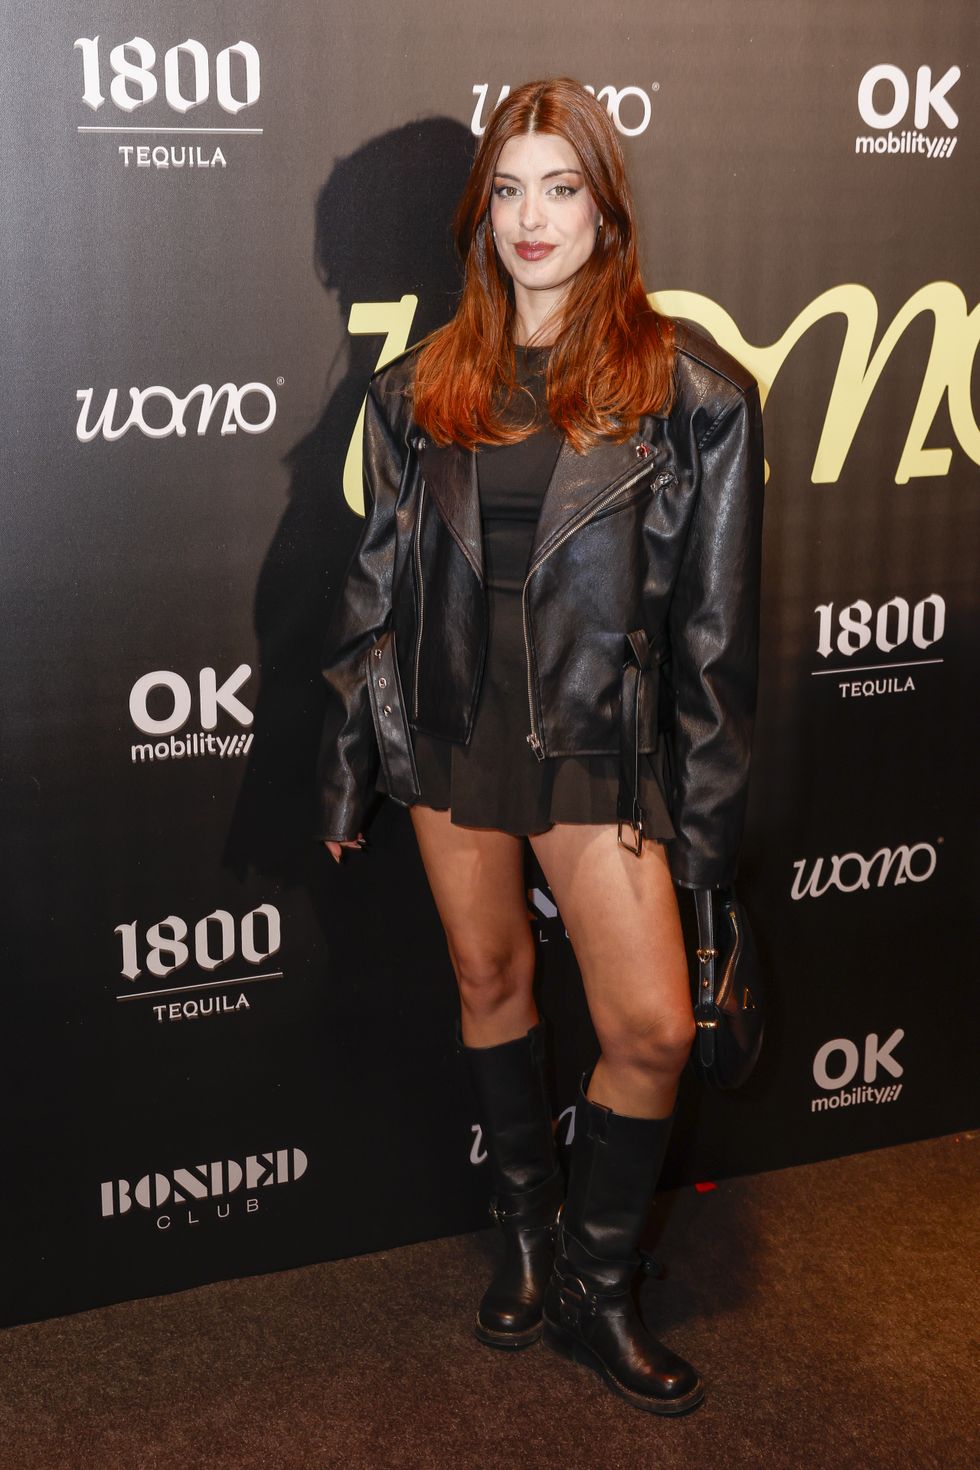 aida domenech dulceida at photocall for vive app brand event in madrid on wednesday, 24 april 2024